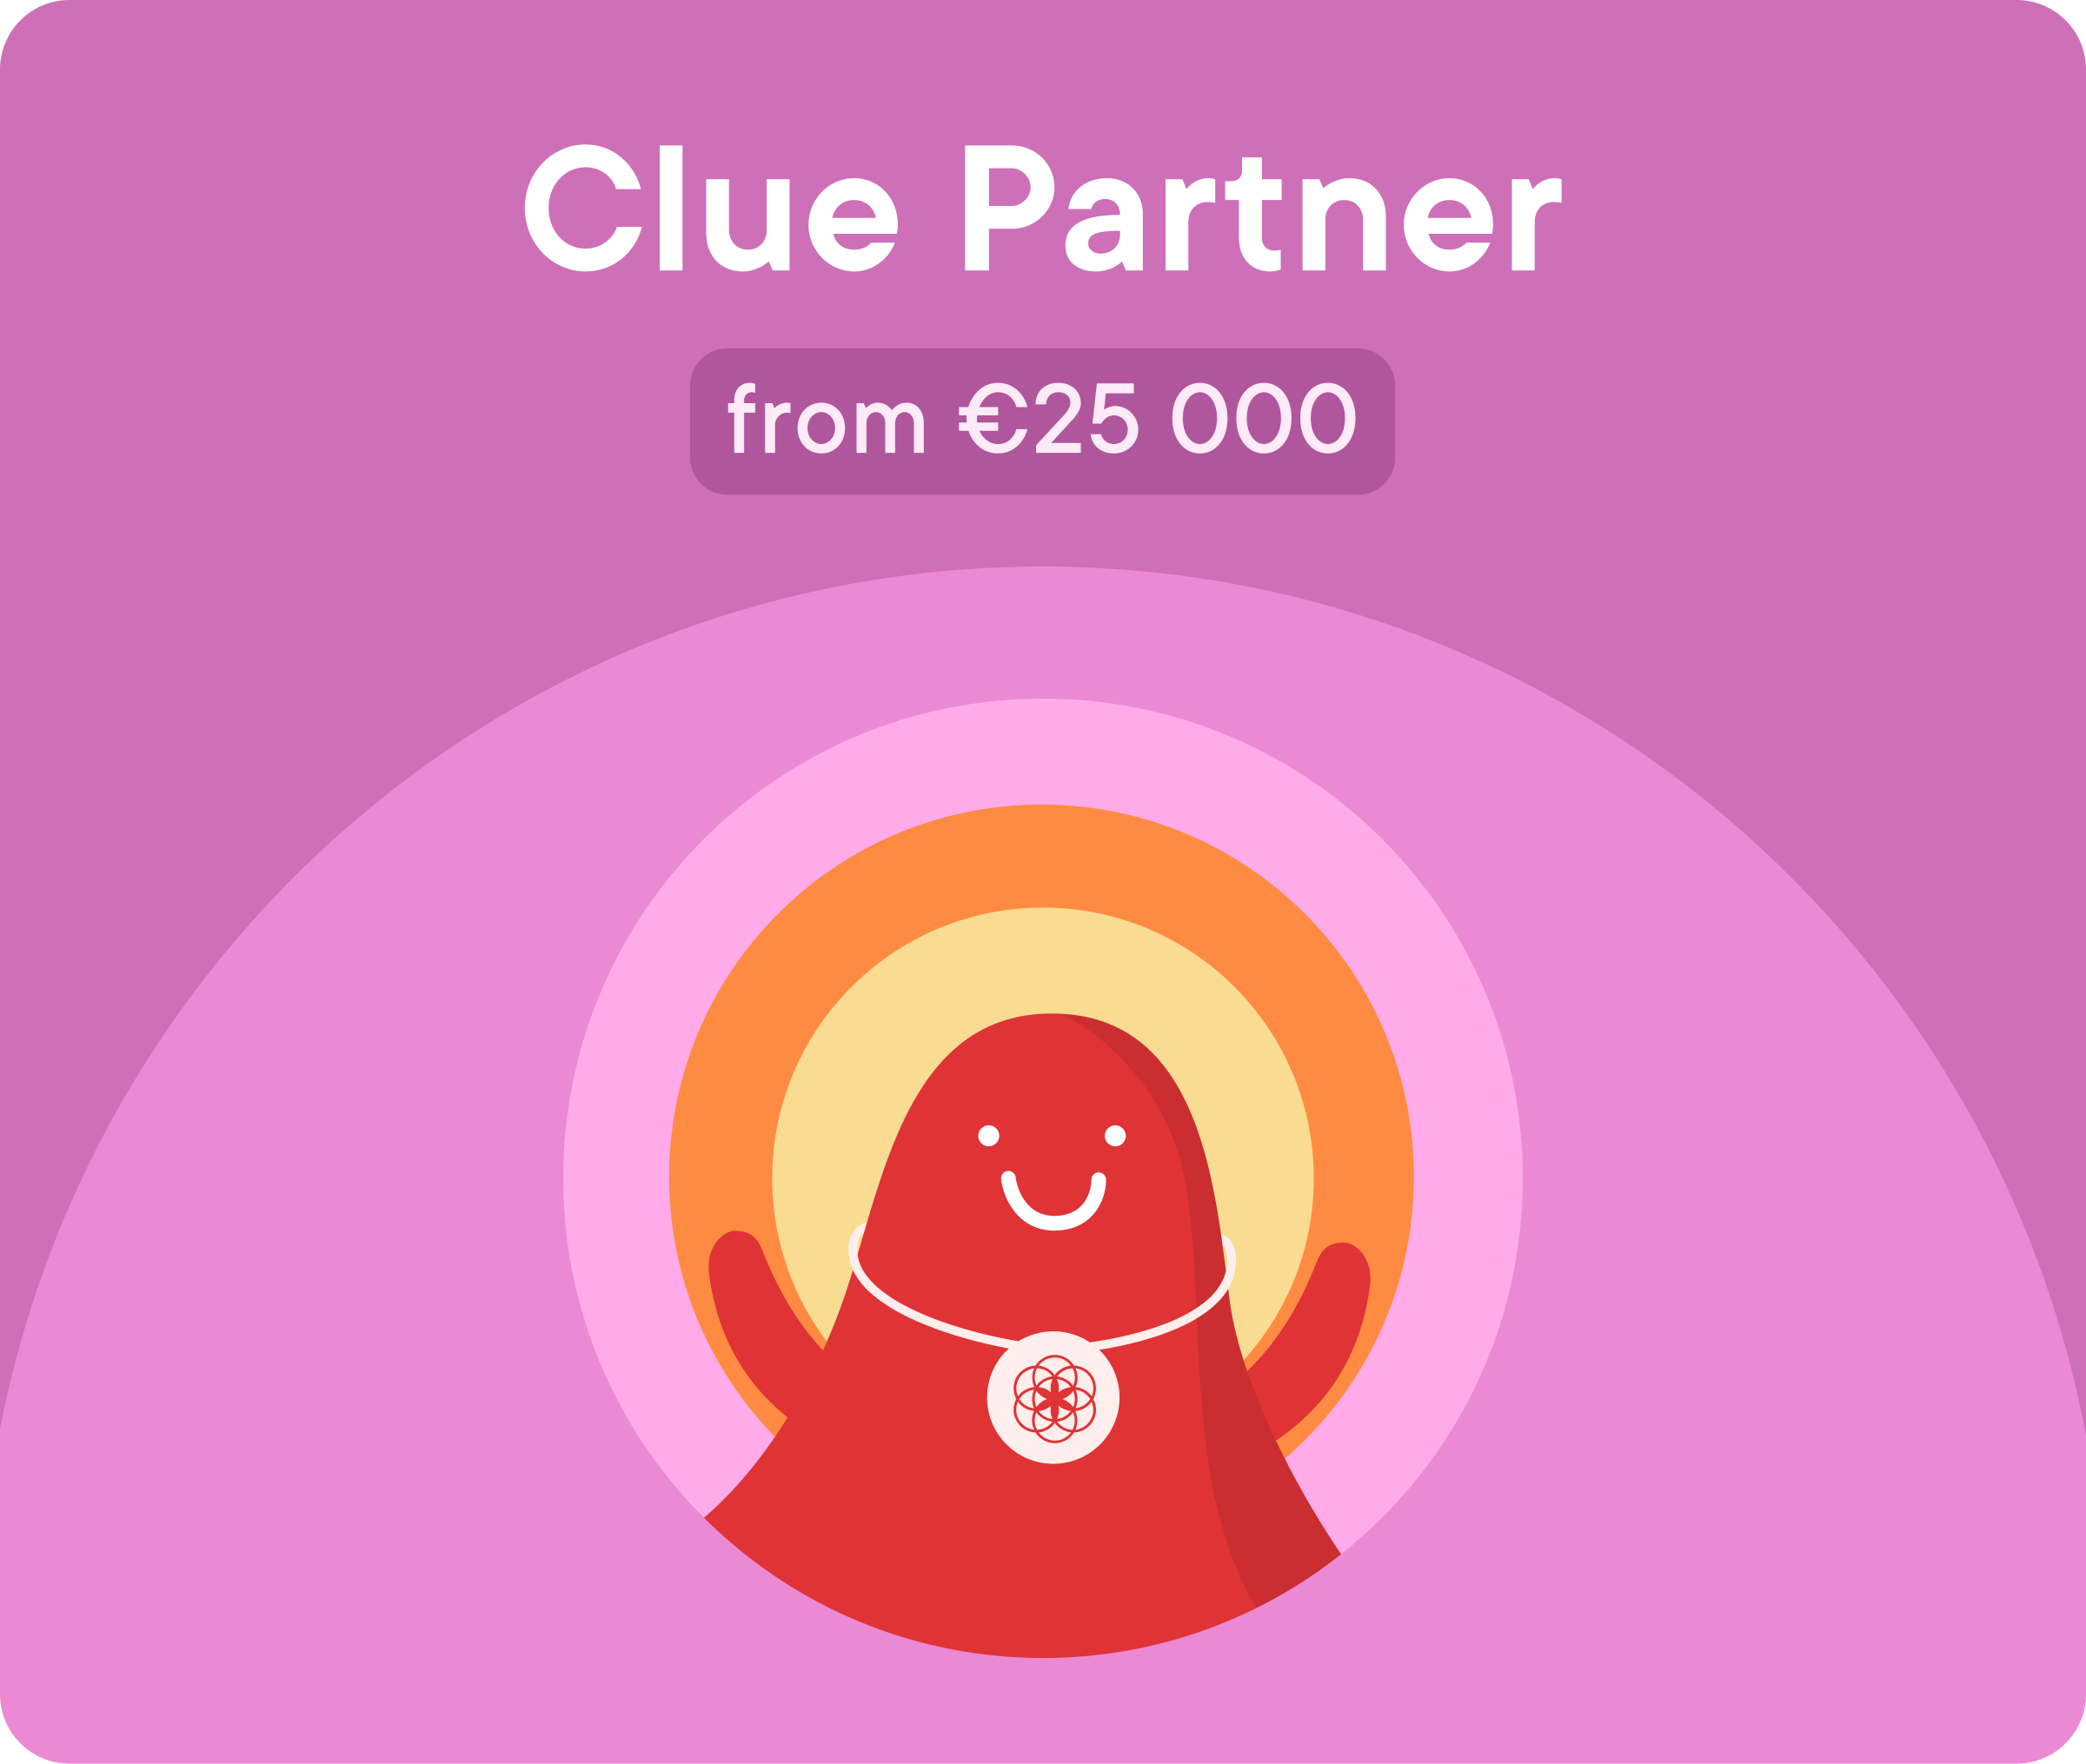 Clue Partner from €25000